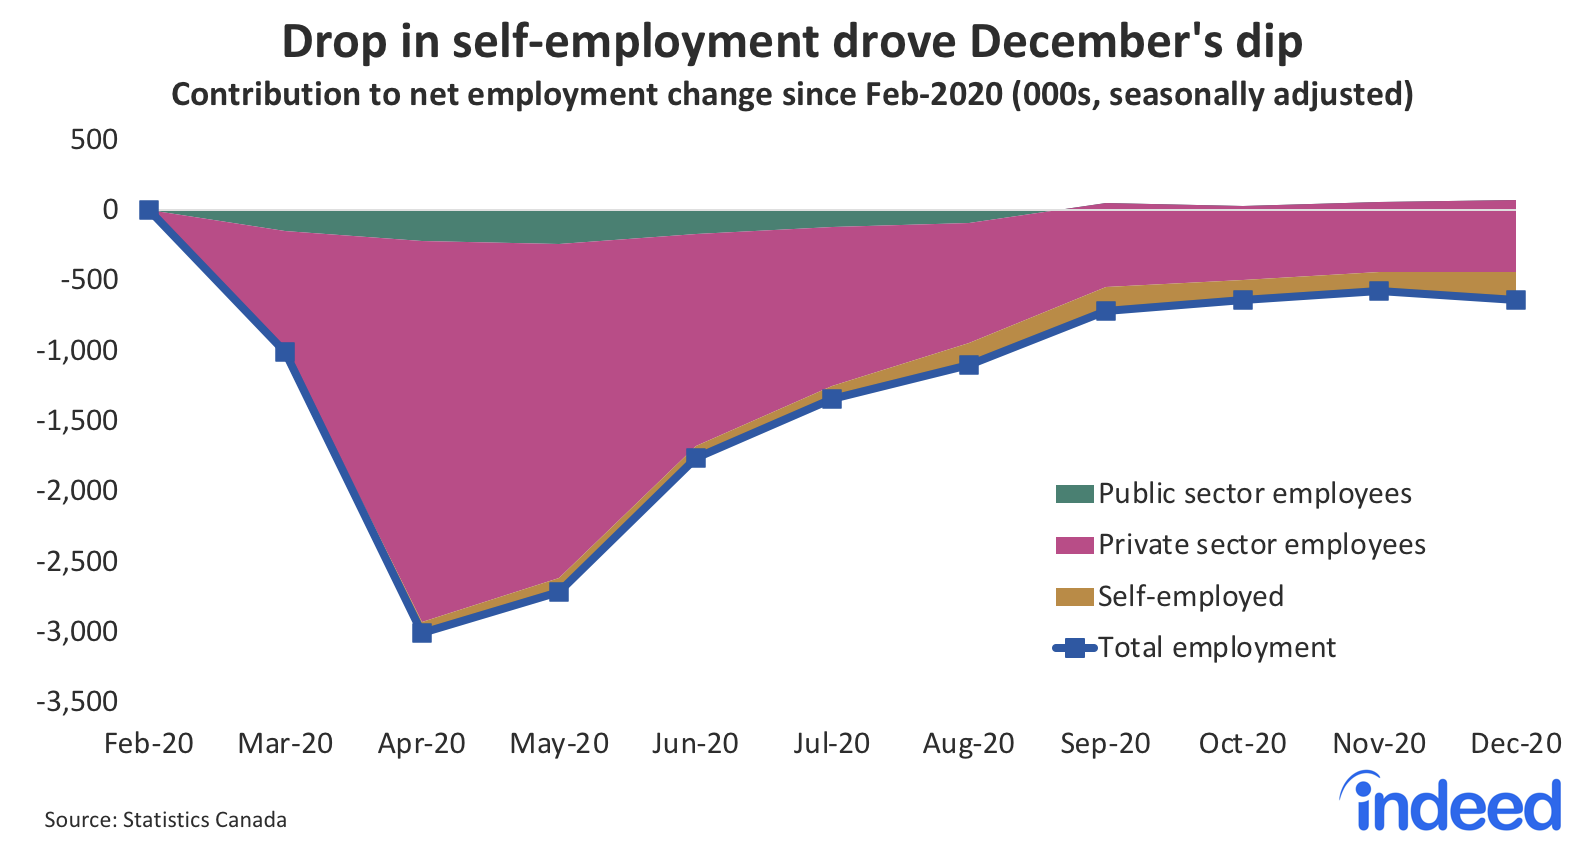 Layer chart titled “Drop in self-employment drove December’s dip.” With a vertical axis ranging from -3500 to 500, Indeed mapped the contribution to net employment change since February 2020, along a horizontal axis ranging from February 2020 to December 2020 with layers representing “public sector employees,” “private sector employees,” “self-employed,” and “total employment.” A drop in self-employment in December 2020 drove a dip in net employment. 